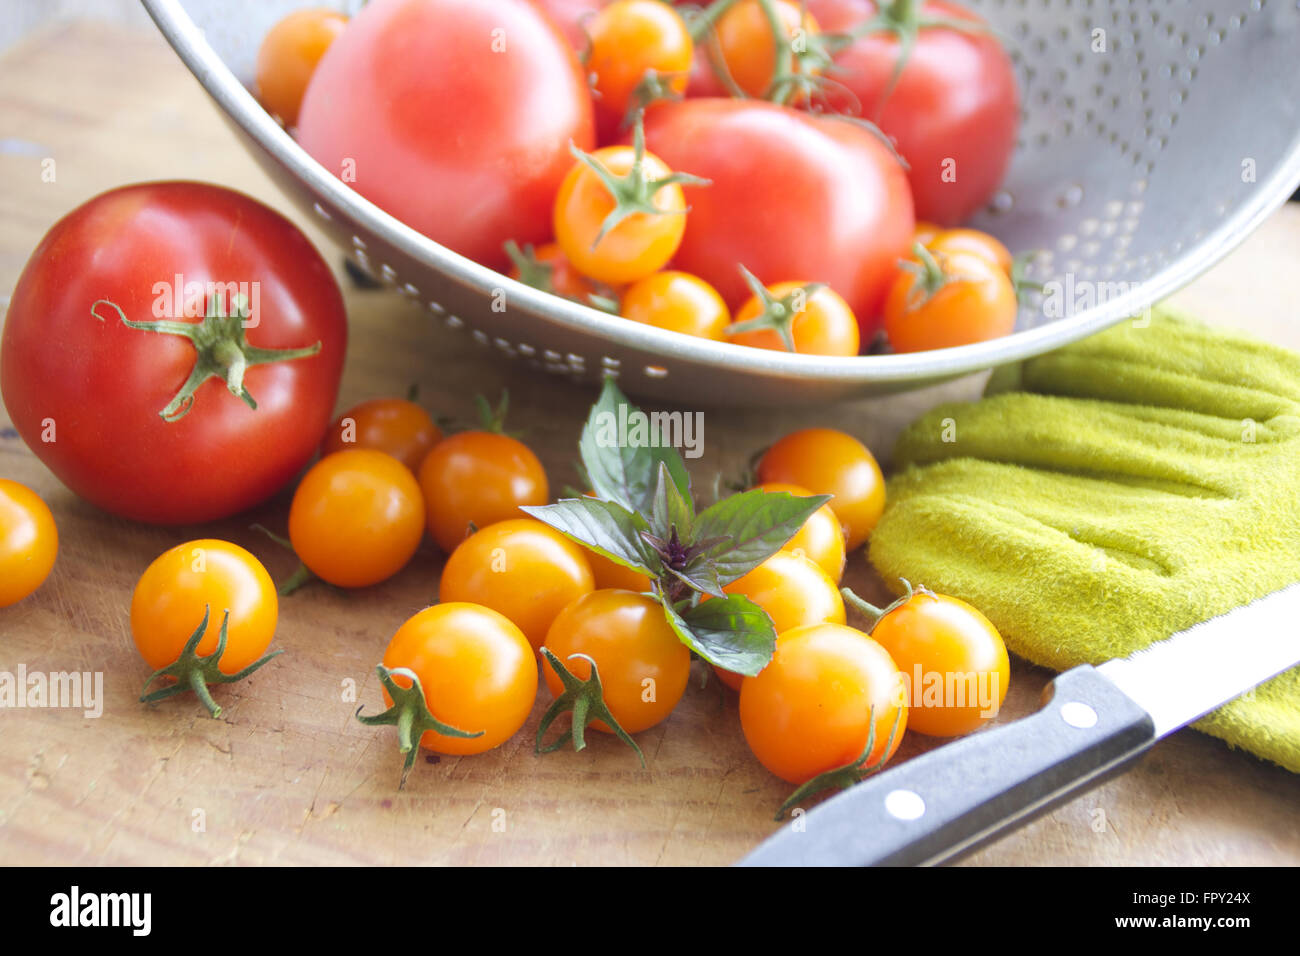 Tomato harvest with a veriety of red and orange cherry tomatoes, green gloves and knife Stock Photo